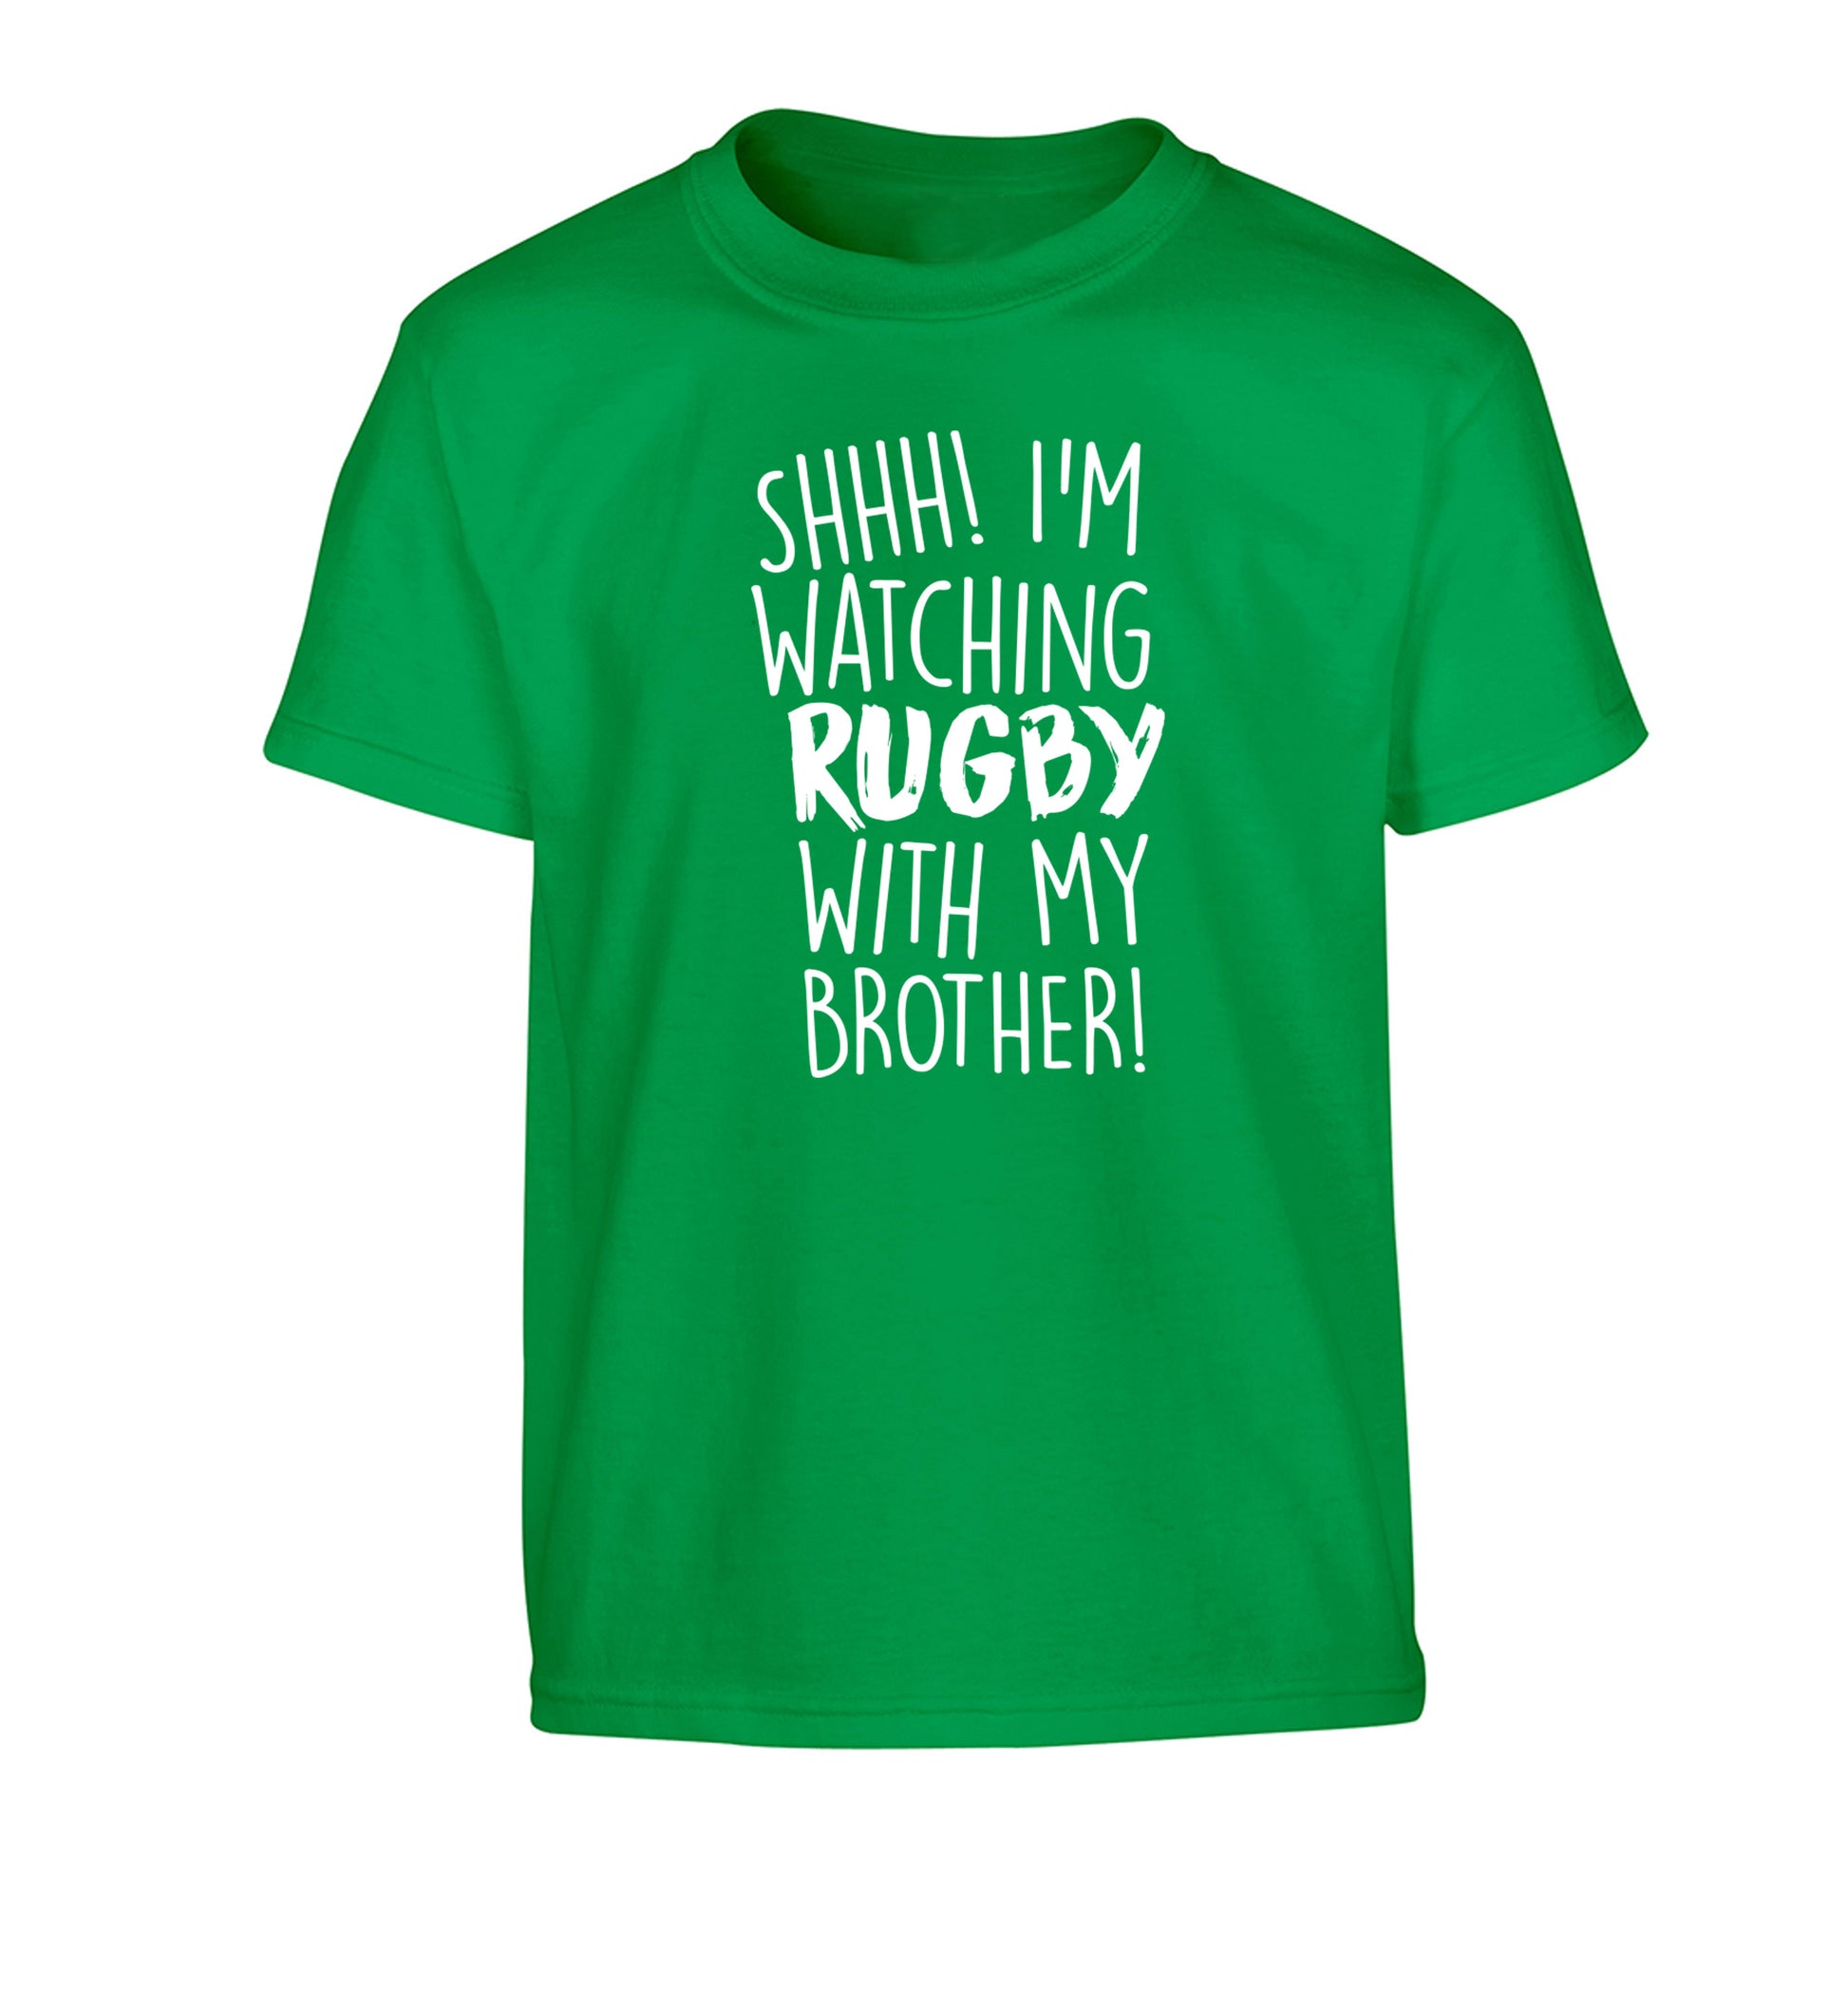 Shh... I'm watching rugby with my brother Children's green Tshirt 12-13 Years